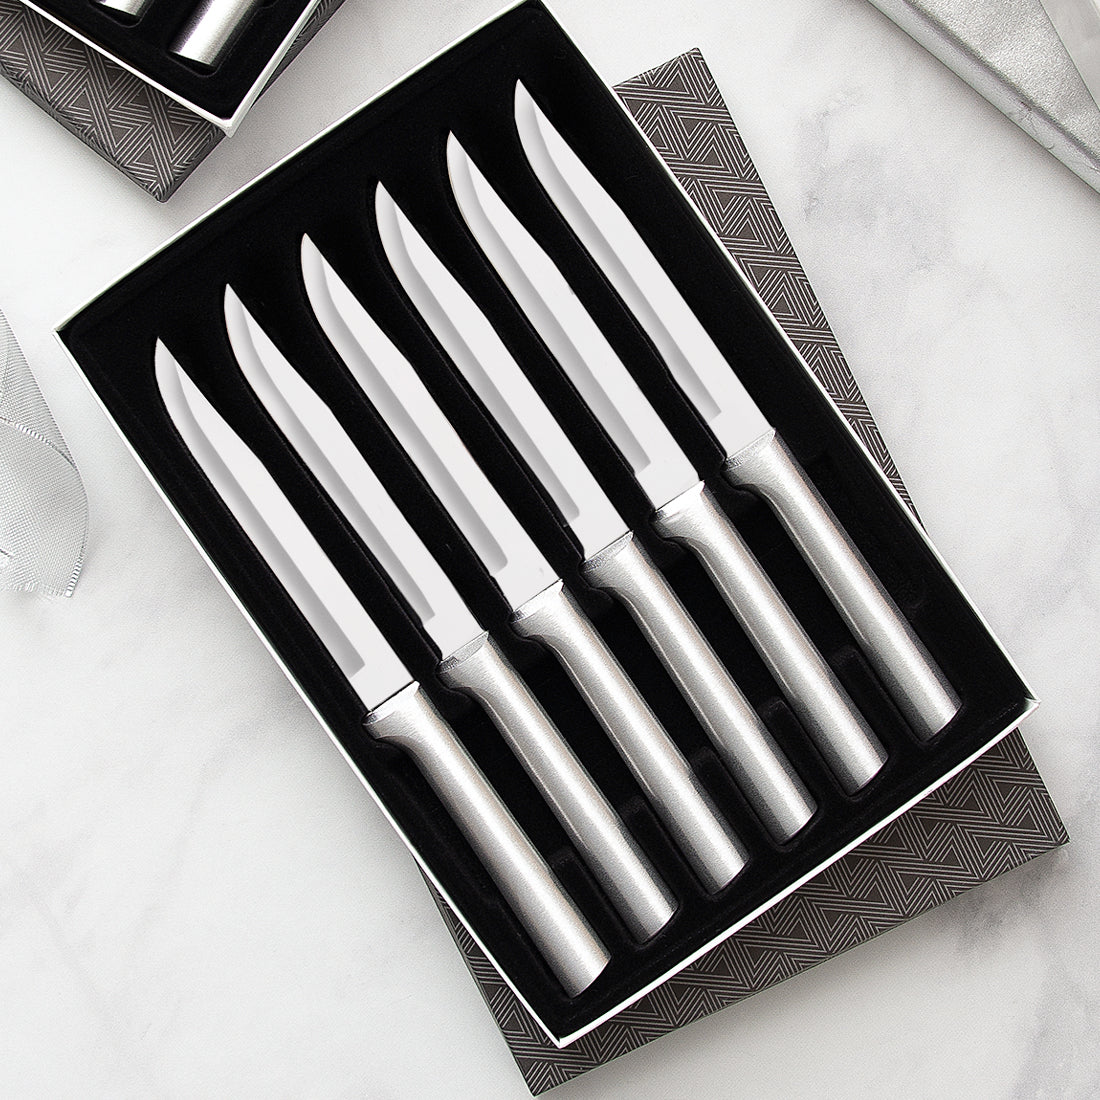 Rada Cutlery Six Utility/Steak Knives Gift Set with silver handles in black-lined gift box. 